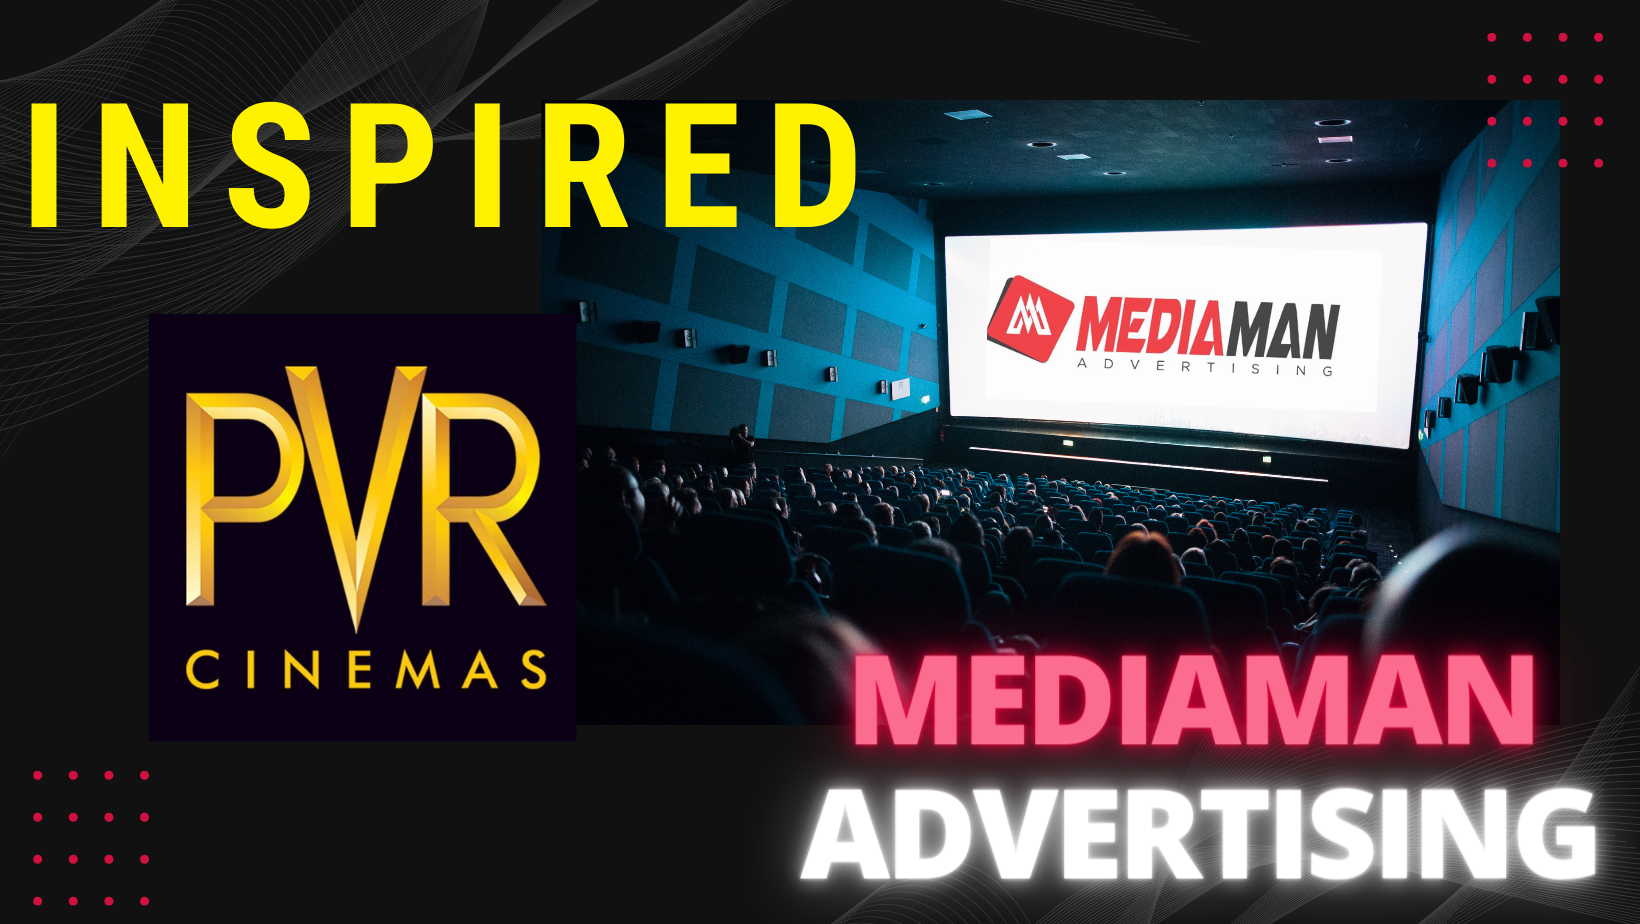 What Does Cinema Advertise?